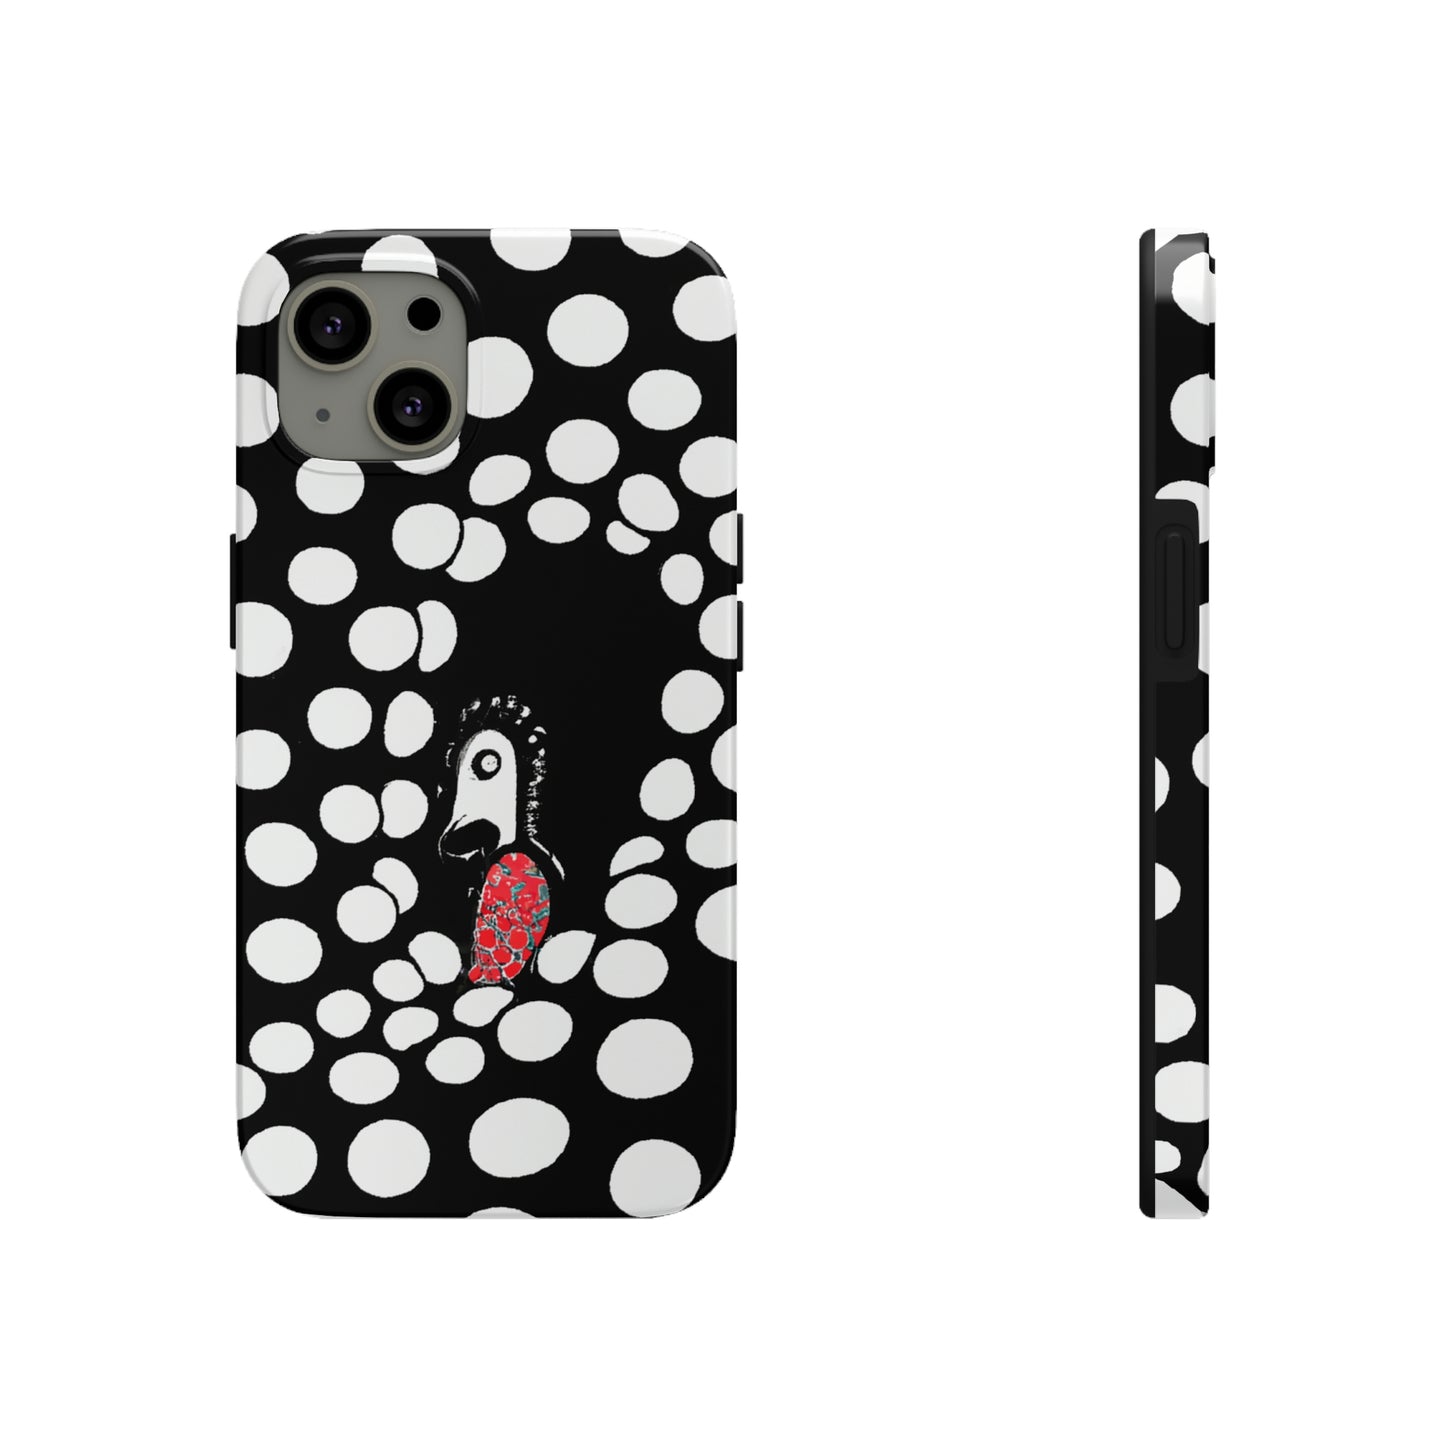 The Great Cavern Illumination - The Alien Tough Phone Cases